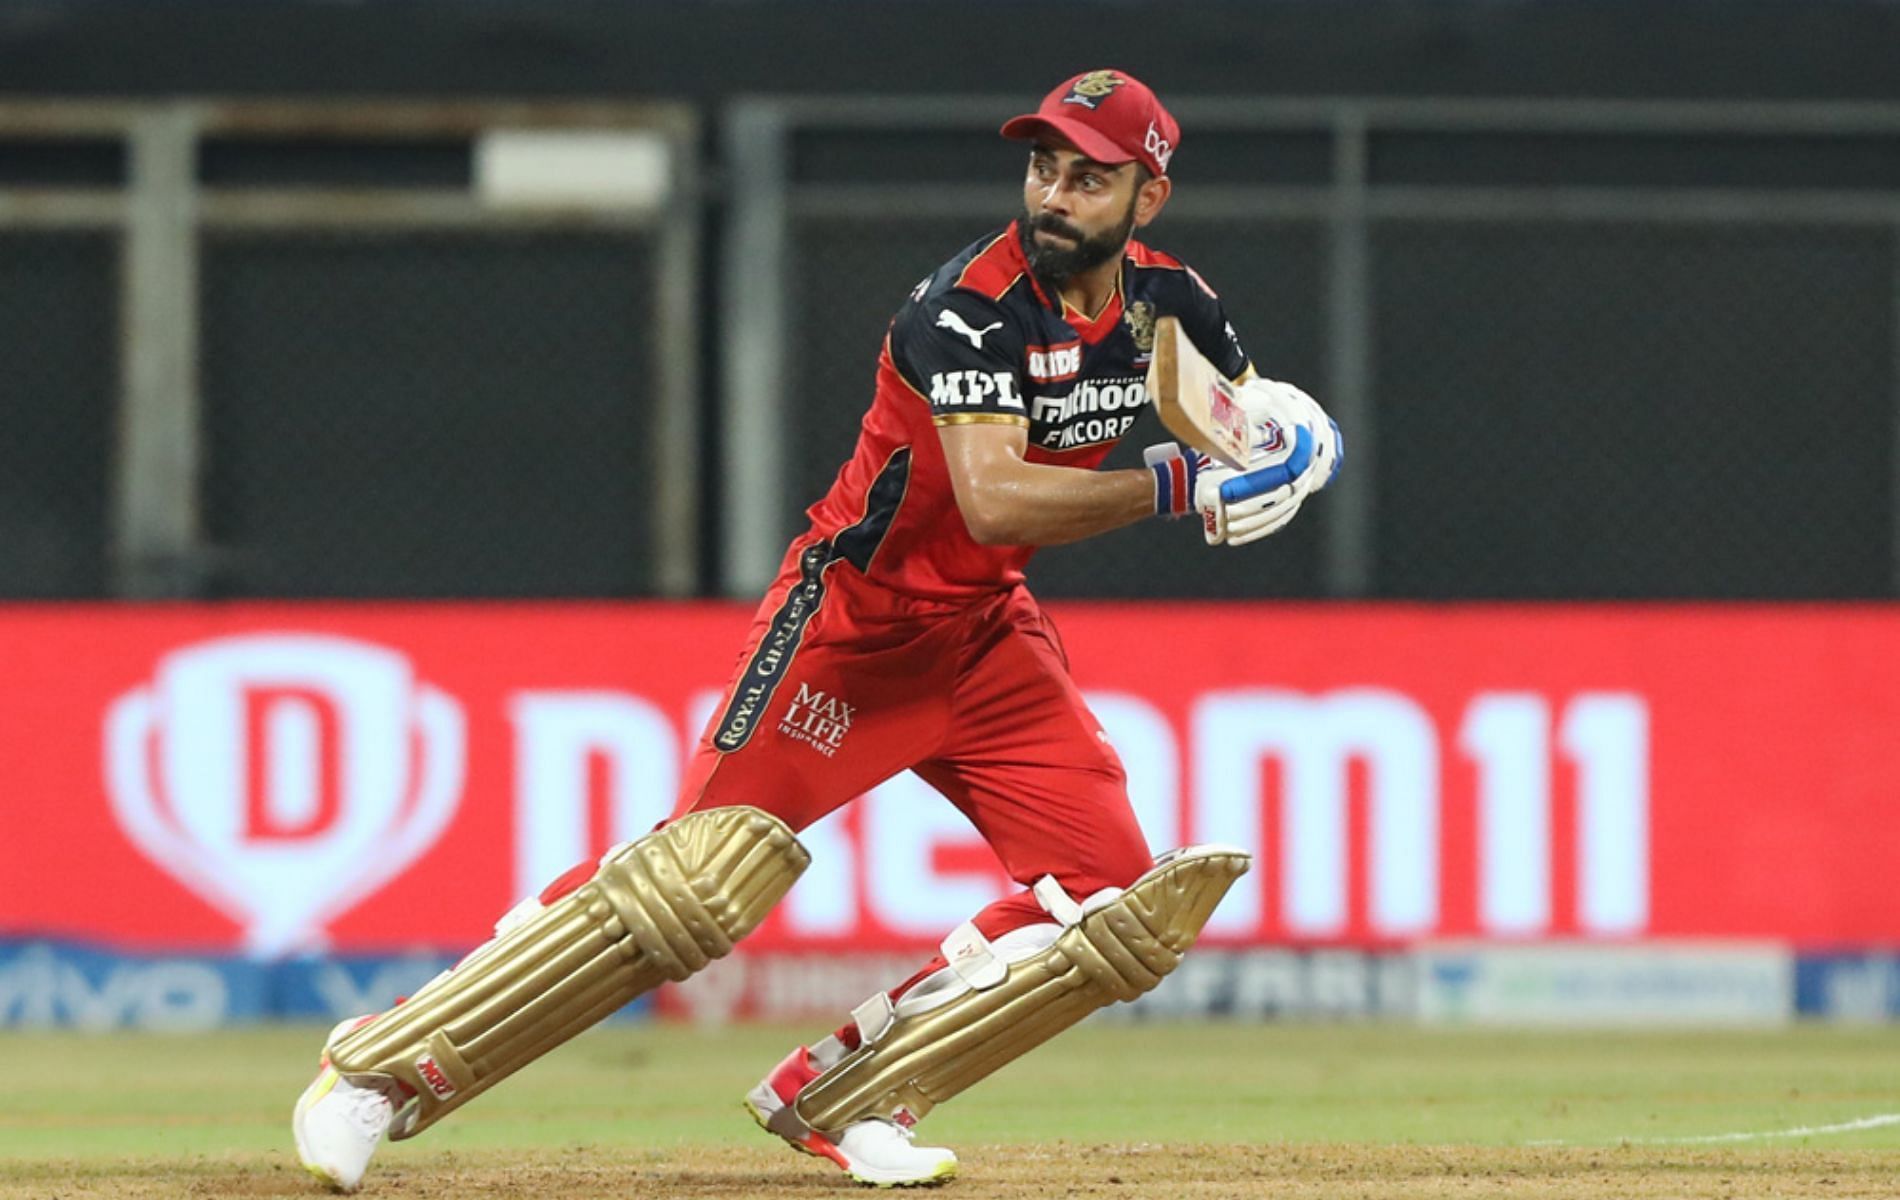 Virat Kohli has been a match-winner for Royal Challengers Bangalore but he has failed to get going in some crucial matches